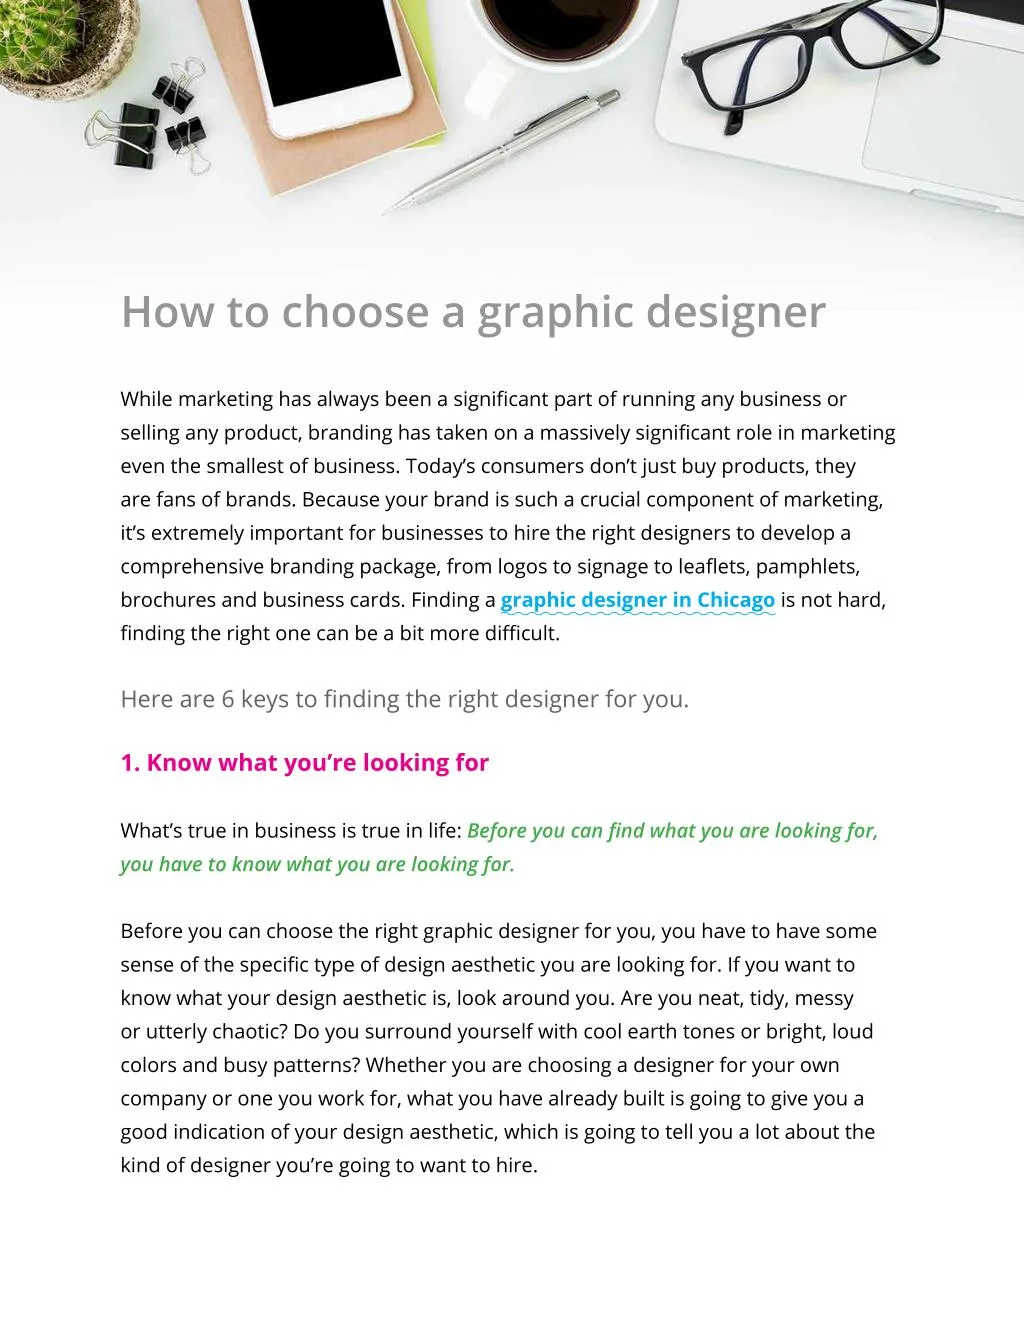 how to choose a graphic designer